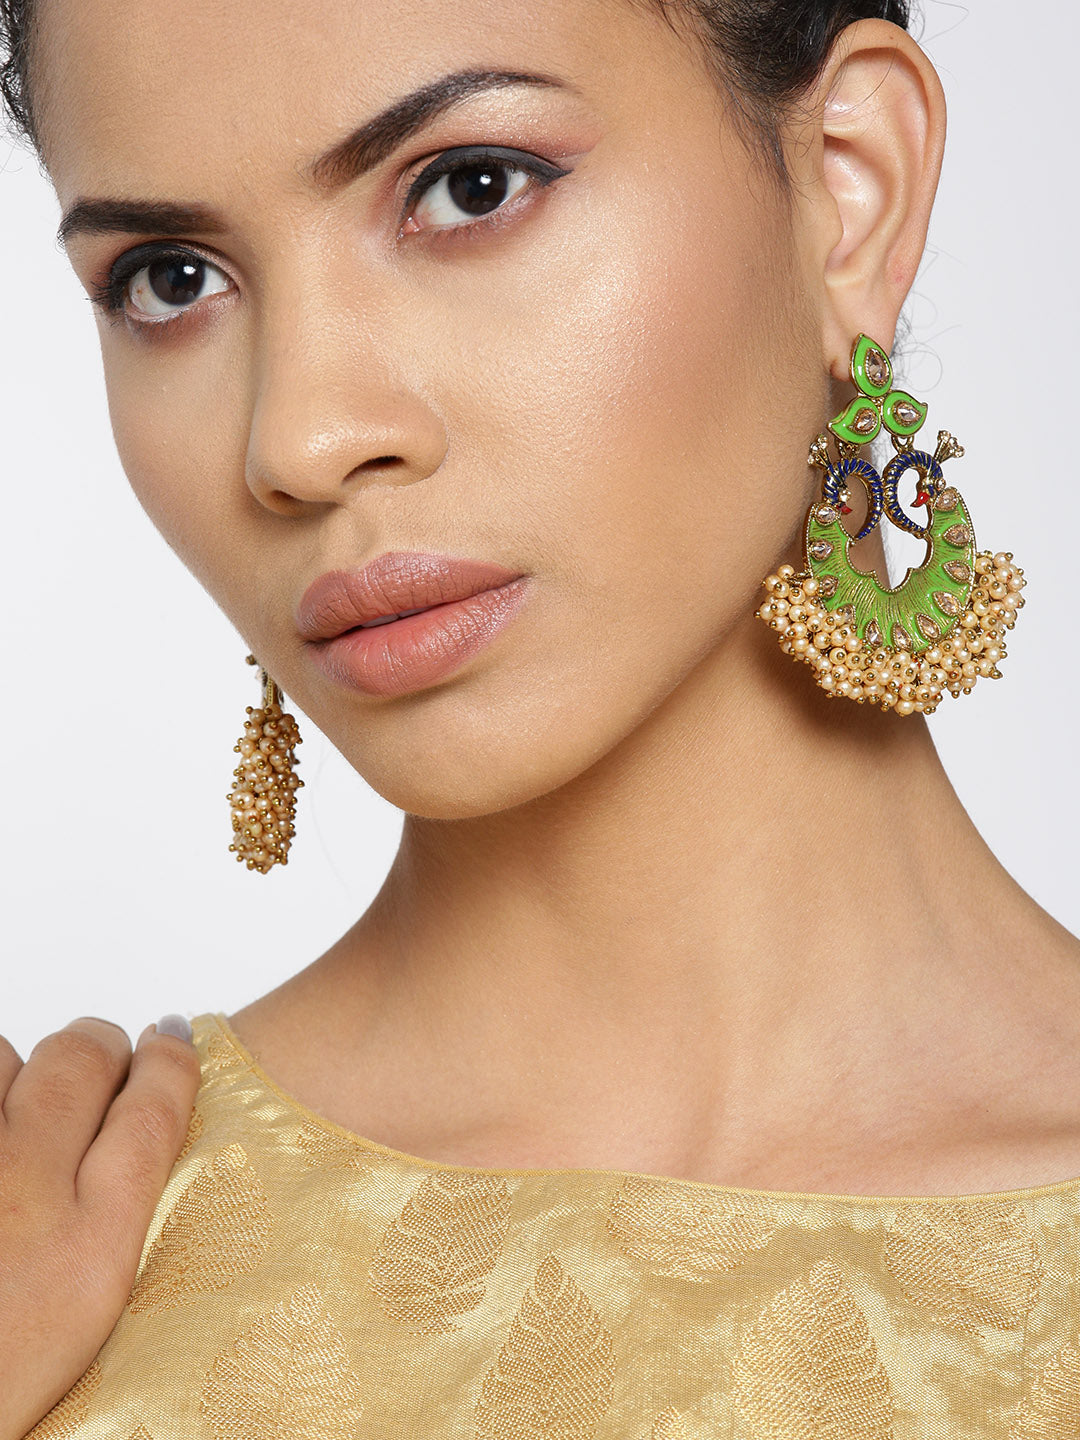 Gold-Plated Stones Studded Peacock Inspired, Meenakari Chandbali Earrings in Green Color with Pearls Drop